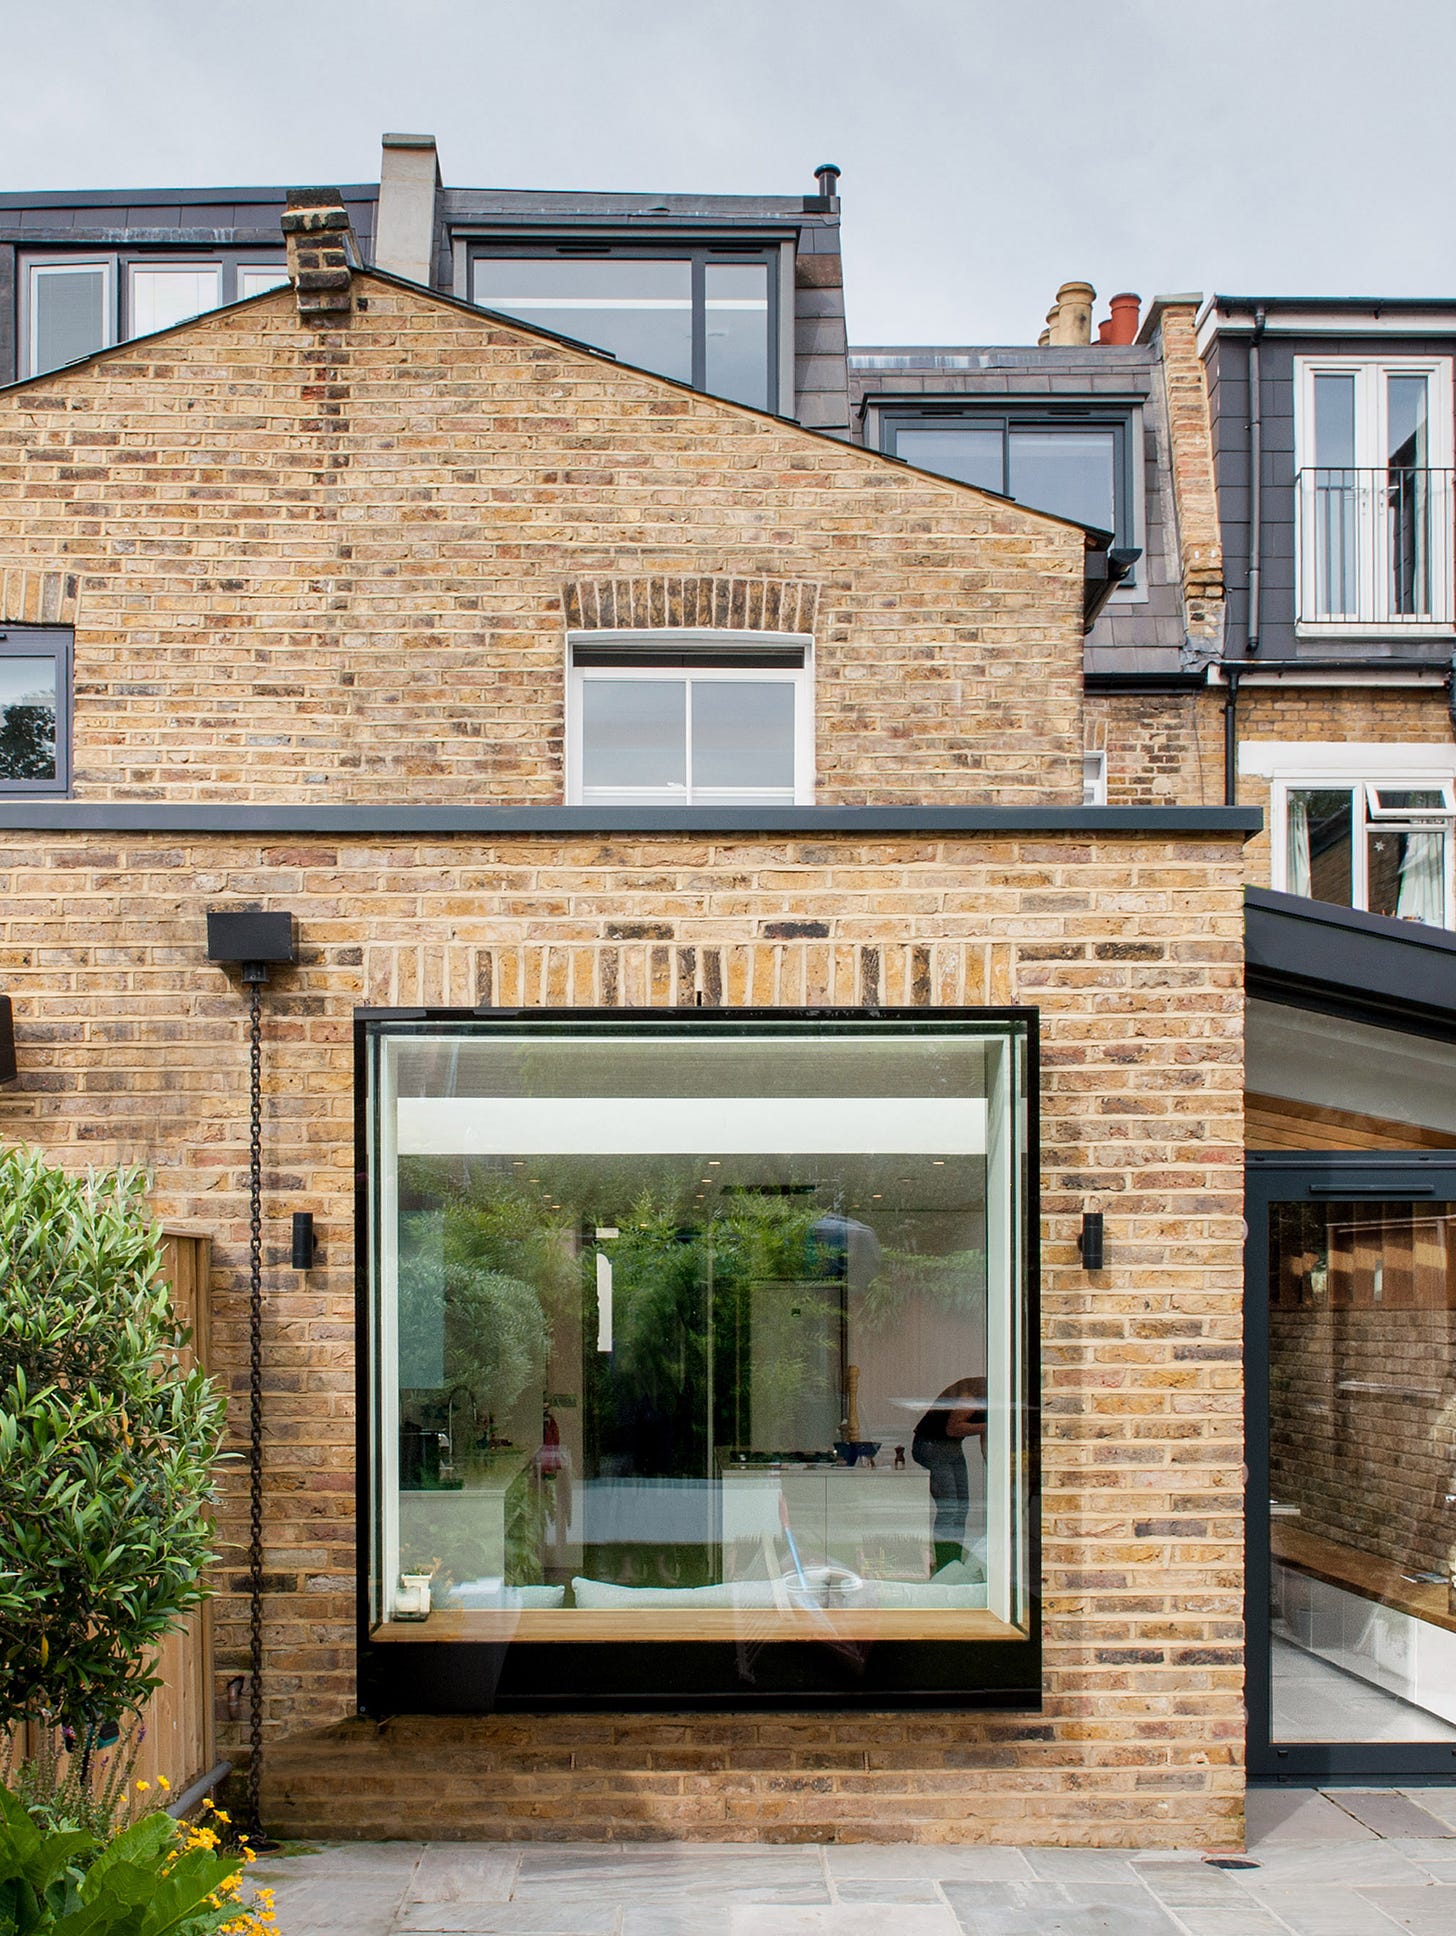 Studio 1 Architects adds brick extension and large window to London home